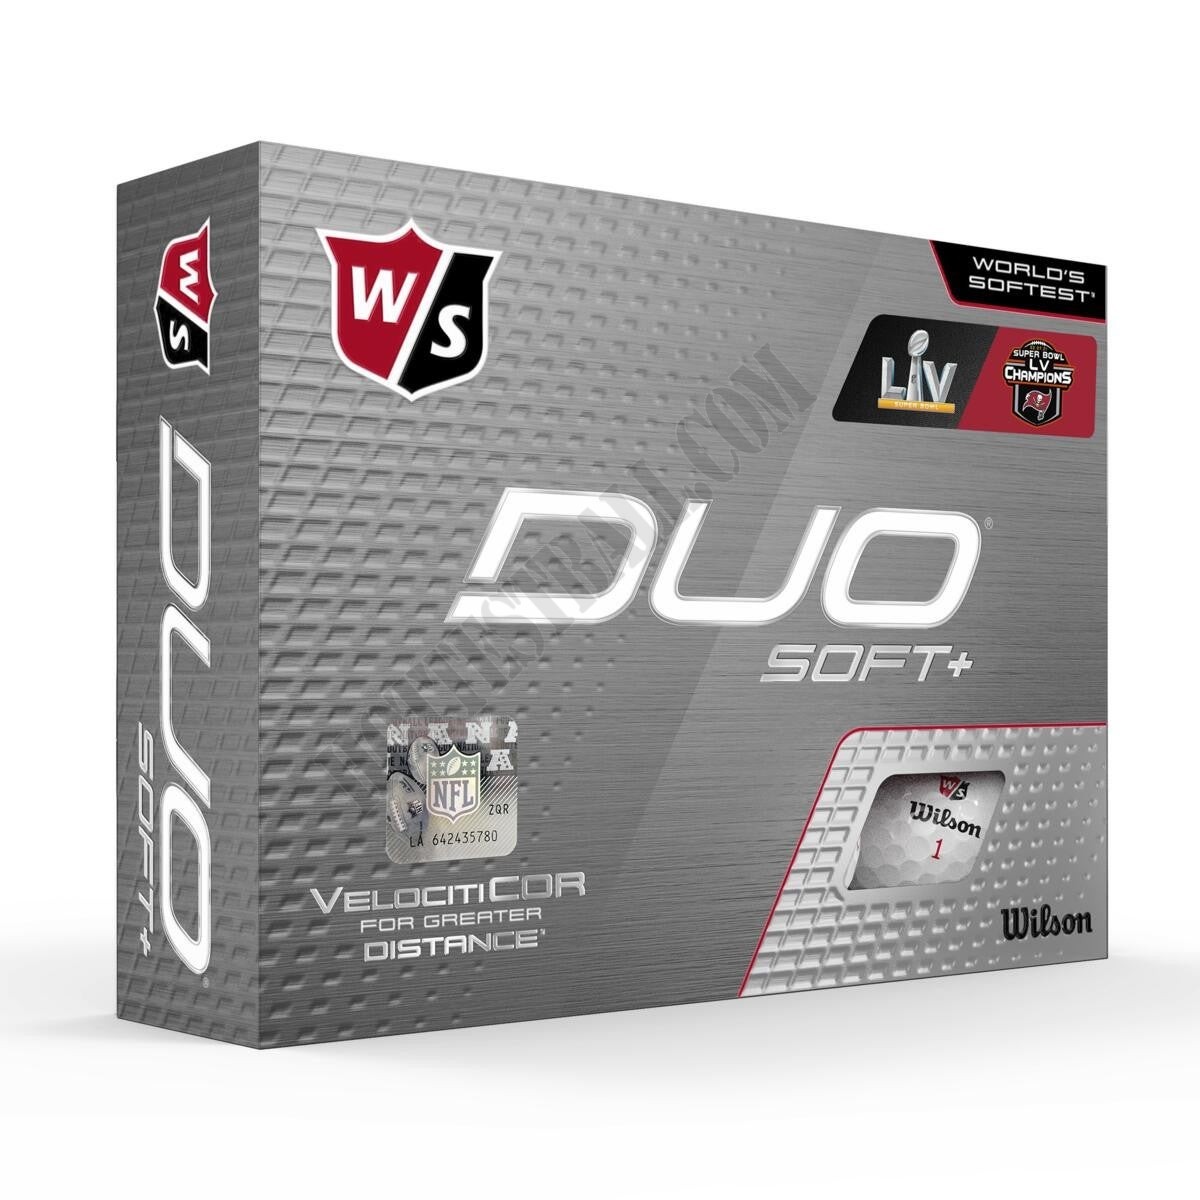 Tampa Bay Buccaneers - DUO Soft+ Super Bowl Championship Golf Balls (12-pack) ● Wilson Promotions - -2